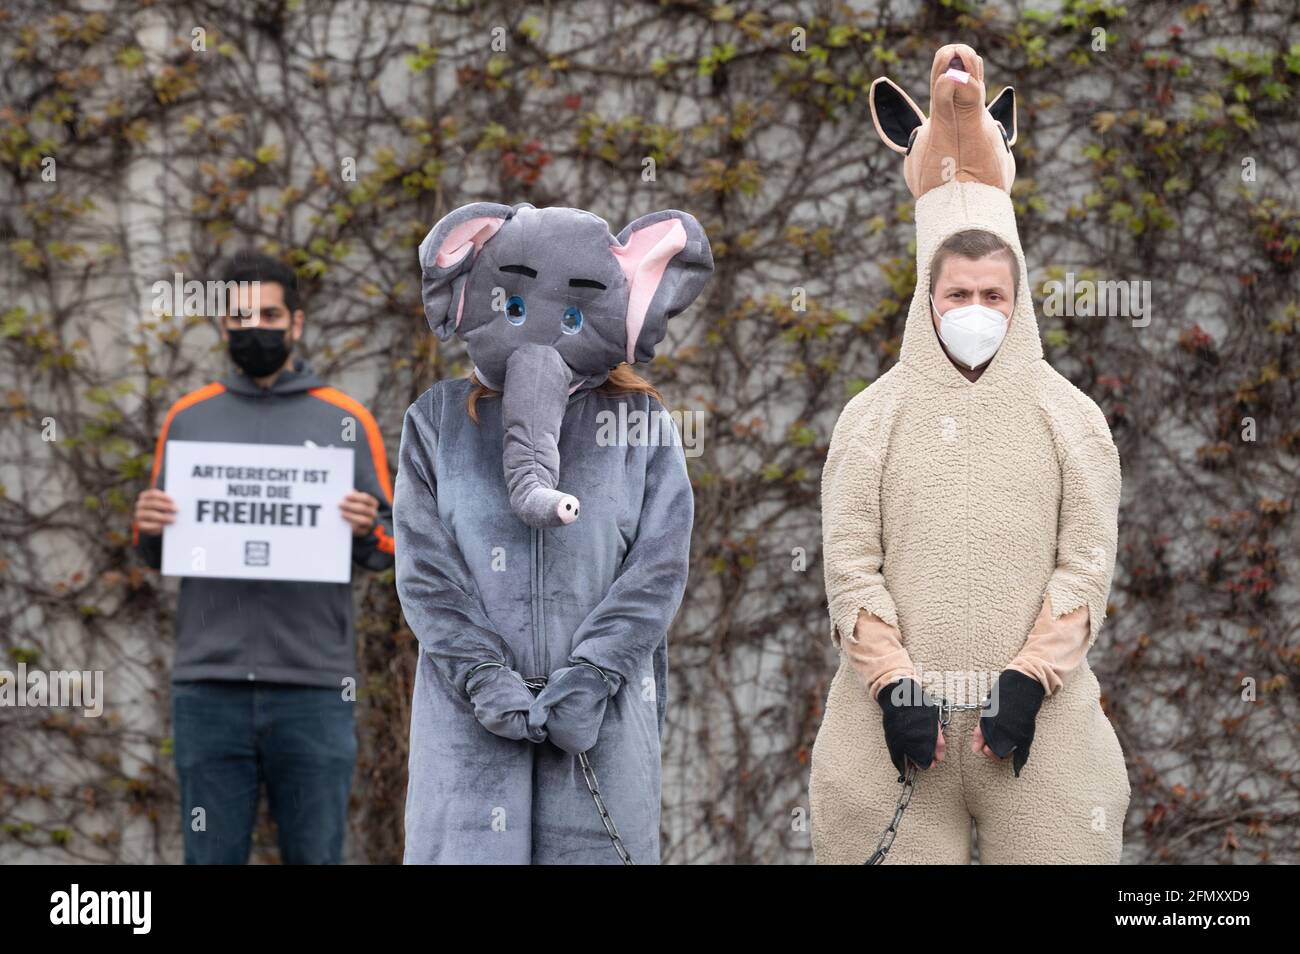 Dresden, Germany. 12th May, 2021. Participants of a demonstration of the  animal rights organization Peta wear animal costumes and handcuffs on a  chain on the sidelines of a city council meeting at